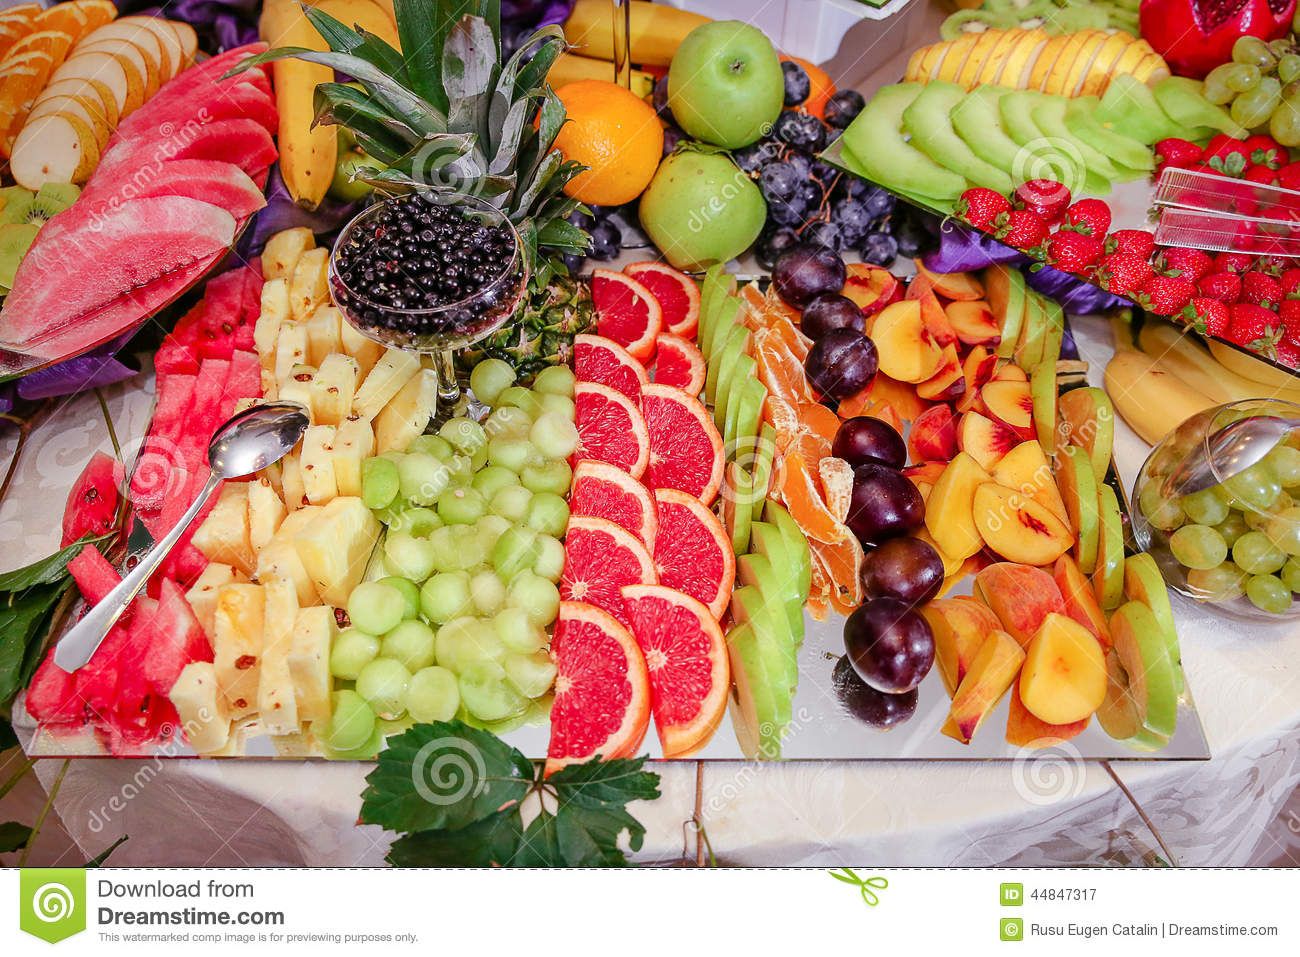 Wedding table decorations with fruits fresh well. -   Fruit decoration ideas